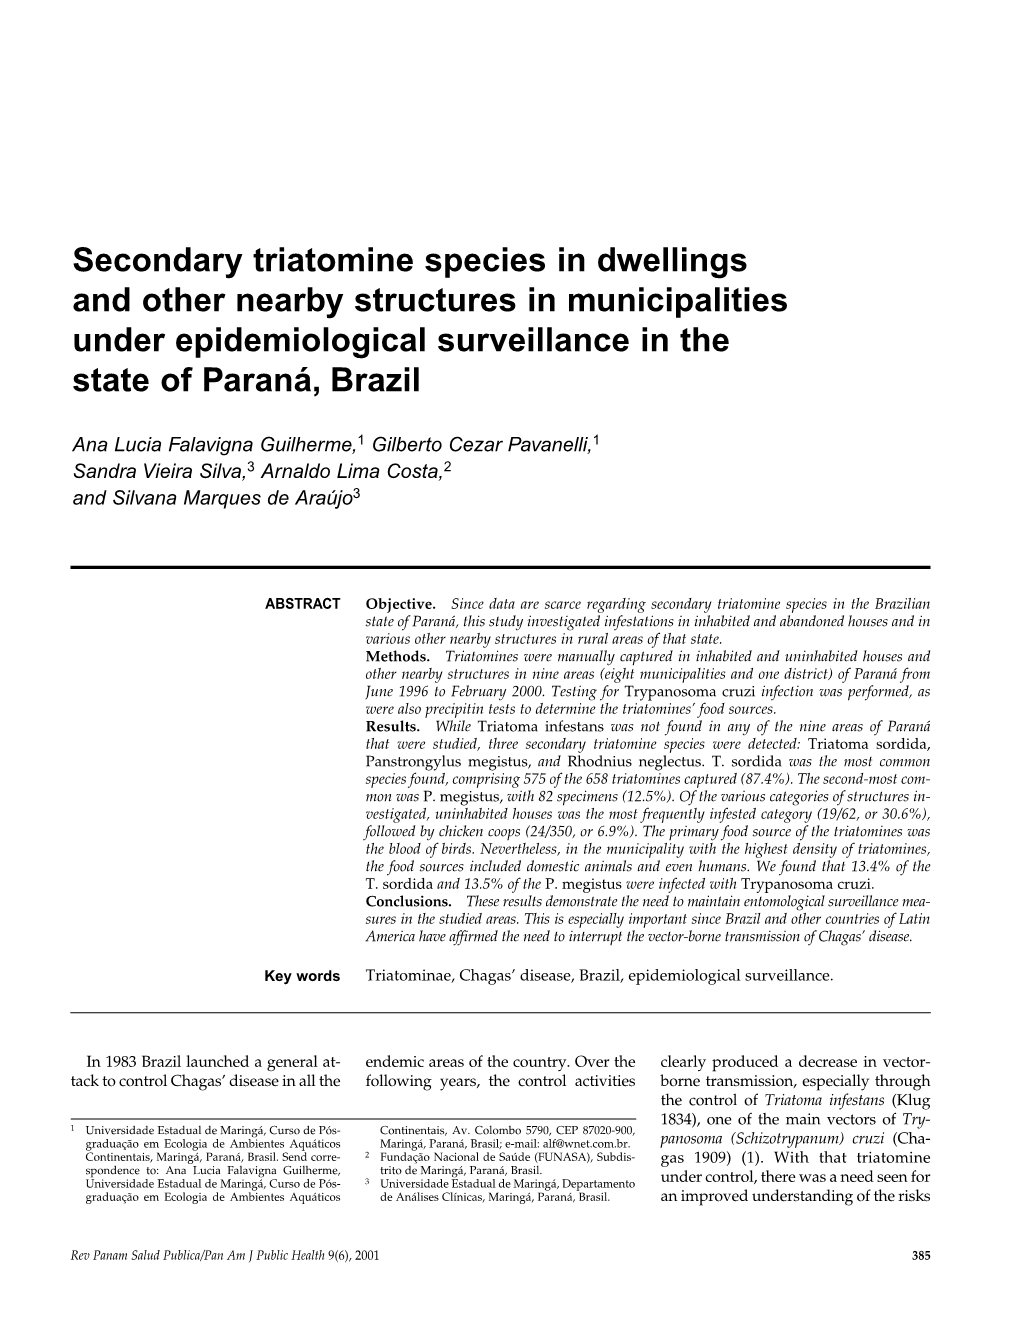 Secondary Triatomine Species in Dwellings and Other Nearby Structures in Municipalities Under Epidemiological Surveillance in the State of Paraná, Brazil